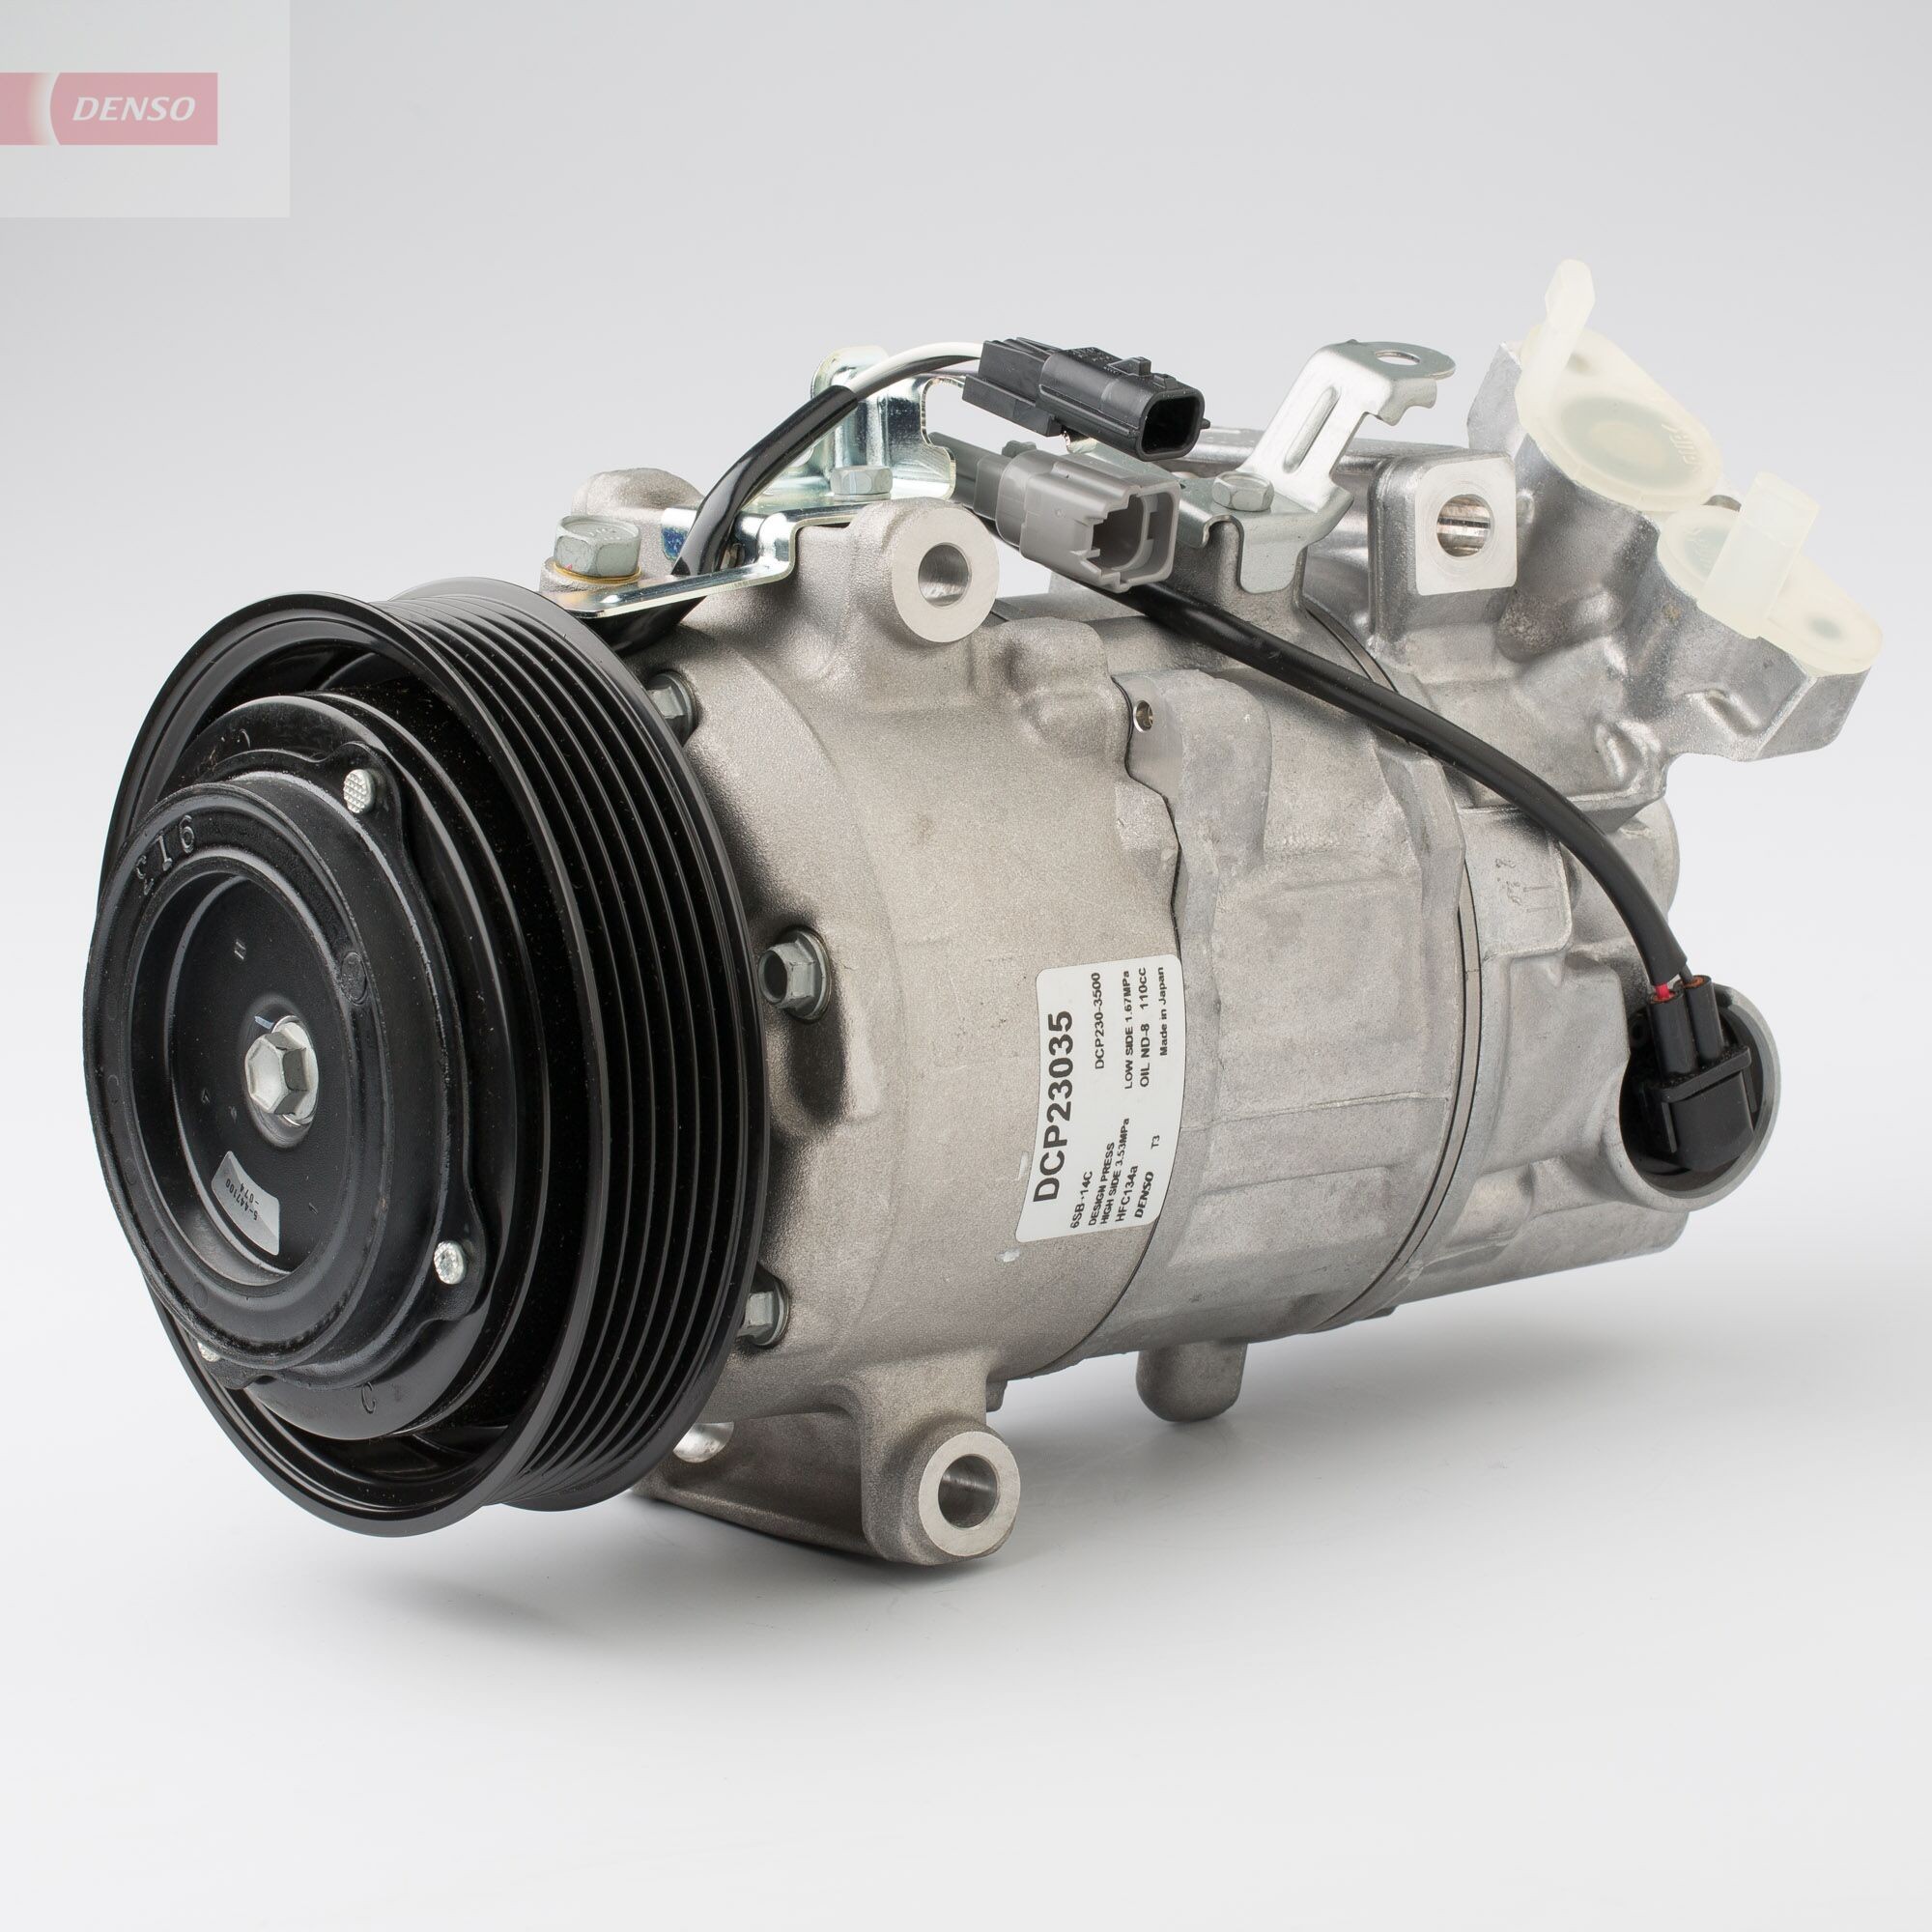 Renault Air conditioning compressor DENSO DCP23035 at a good price